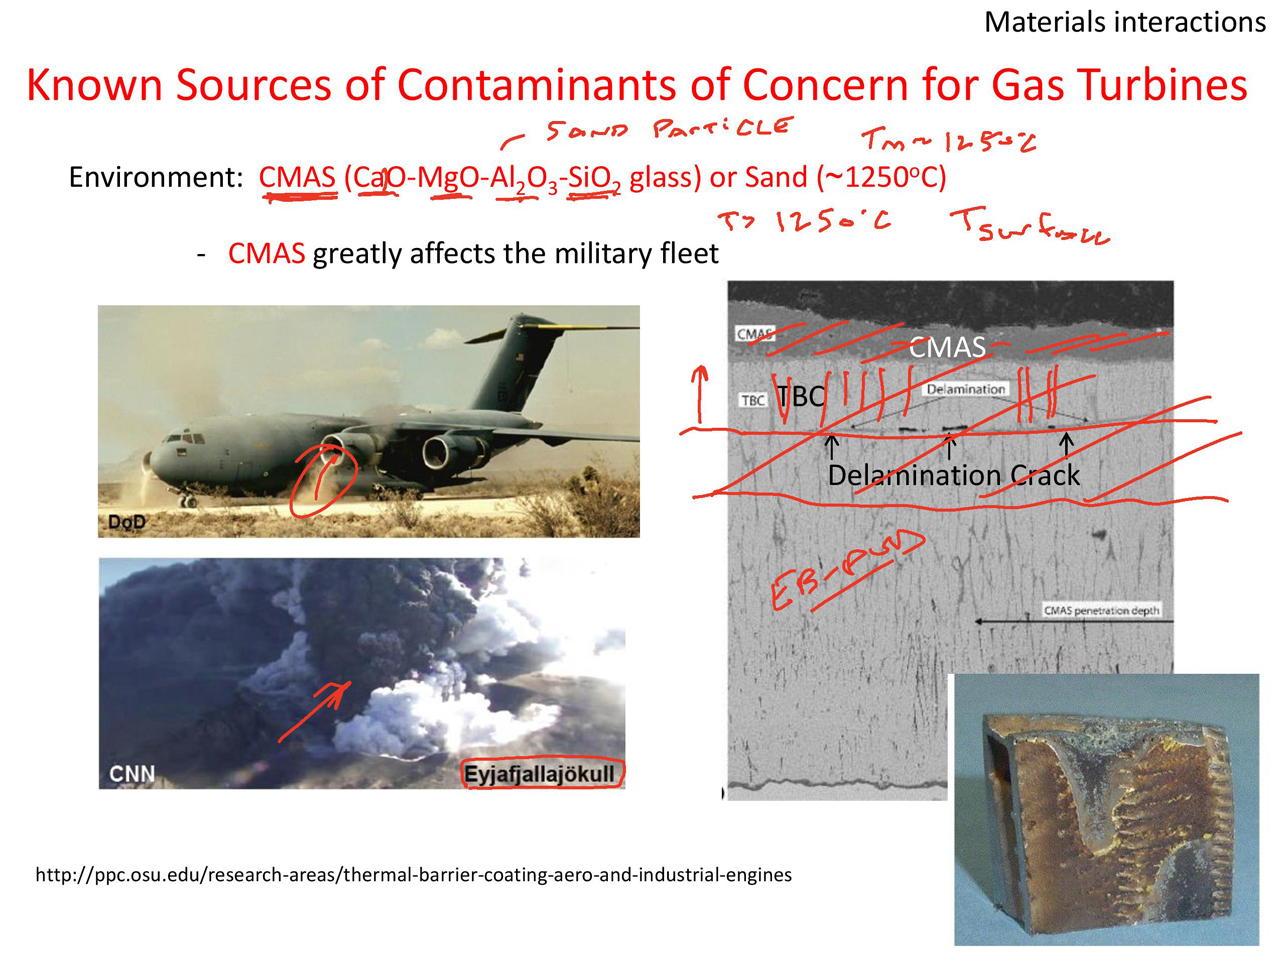 Known Sources of Contaminants of Concern for Gas Turbines